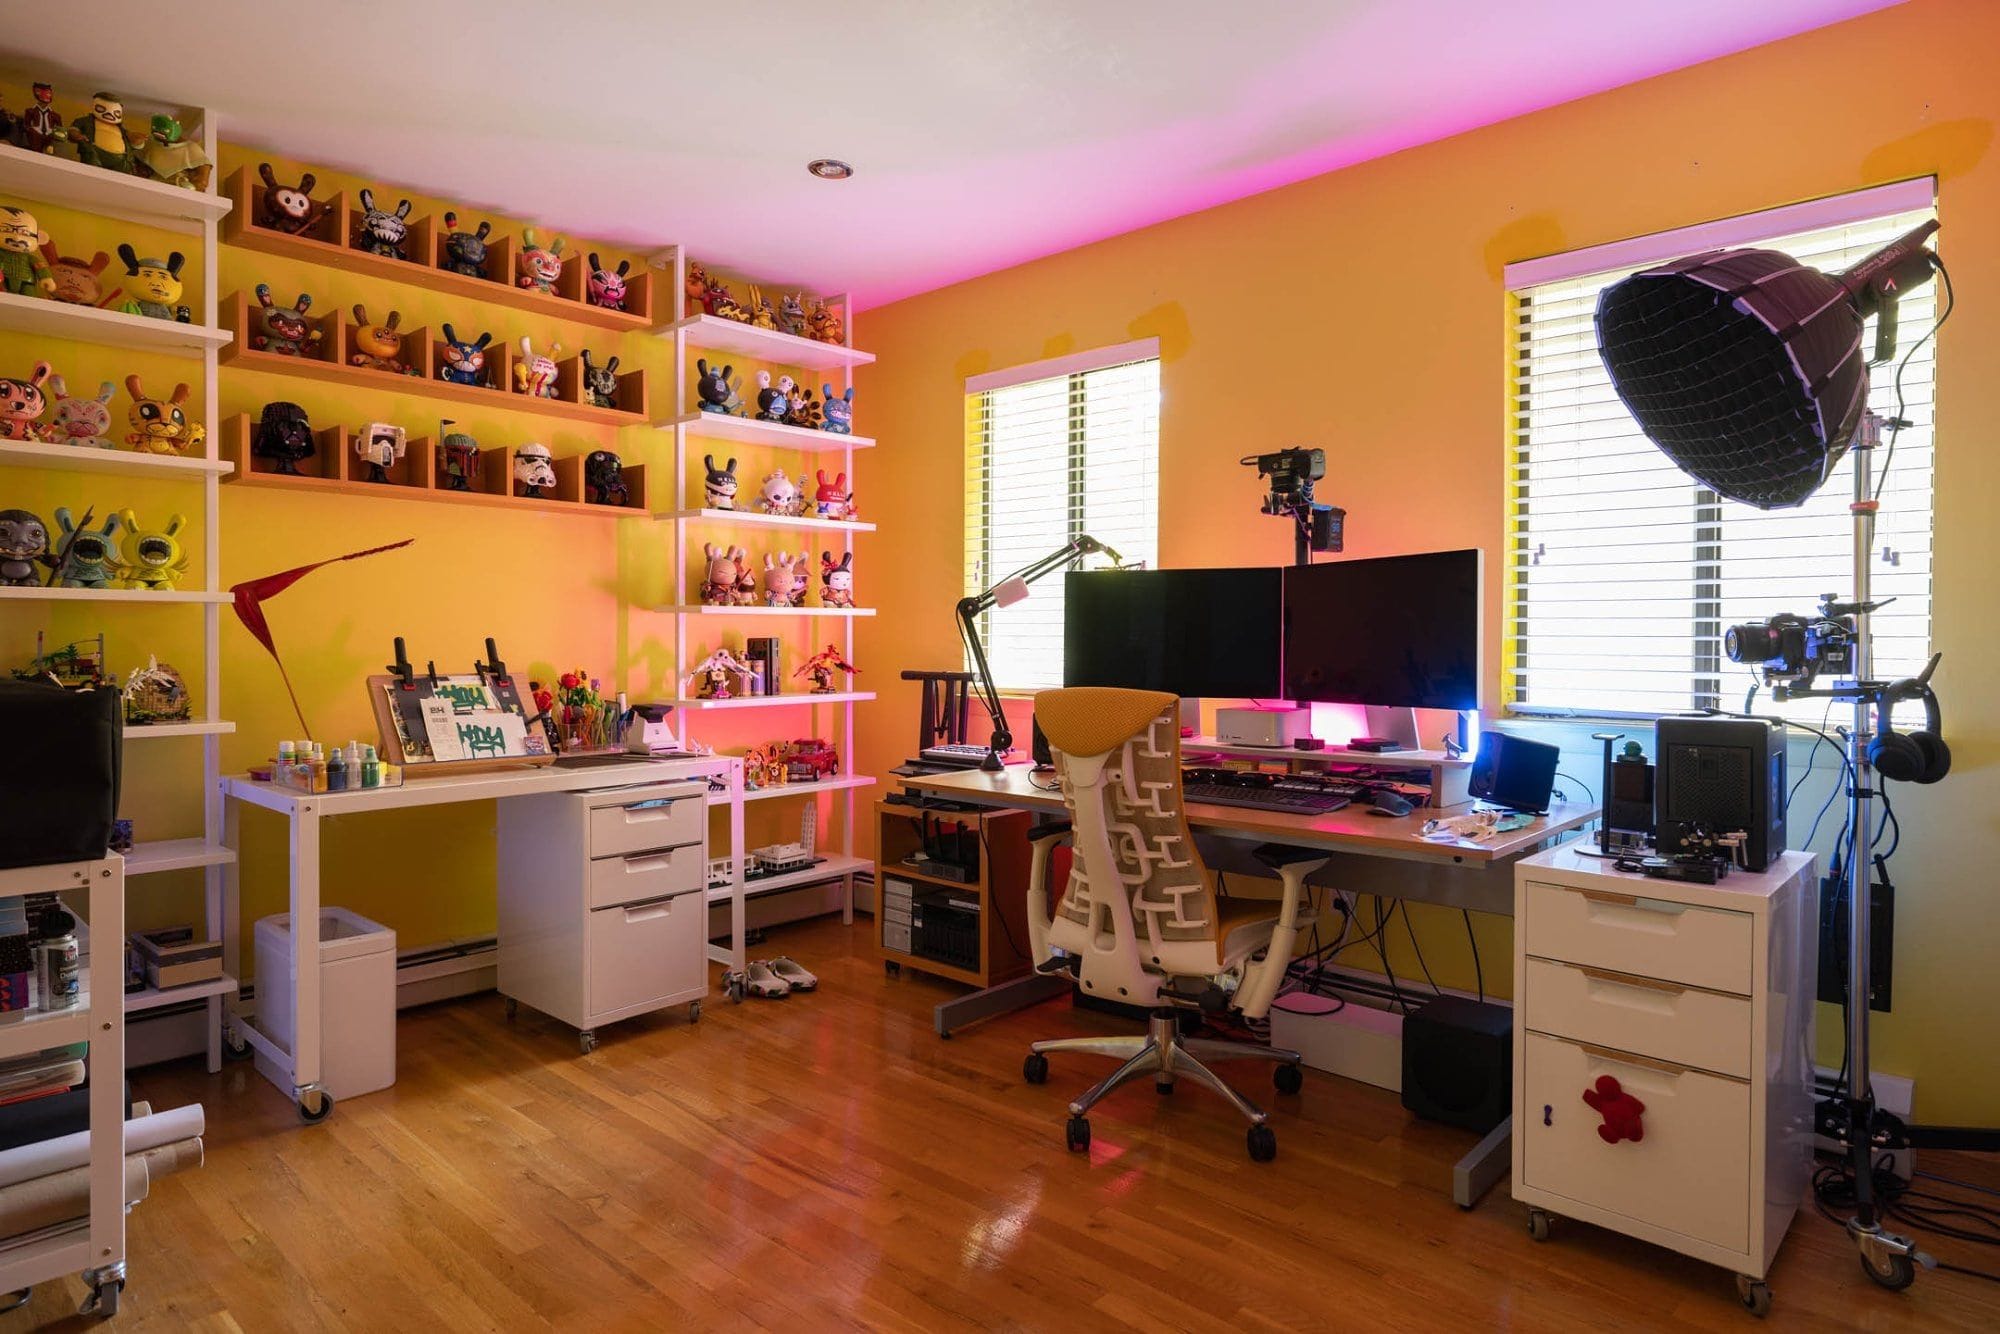 A vibrant creative workspace with wall-mounted shelves displaying colourful figurines, a desk with dual Apple monitors, a drawing tablet, a professional microphone and camera equipment, set against a wall with ambient pink lighting in a room with warm yellow tones